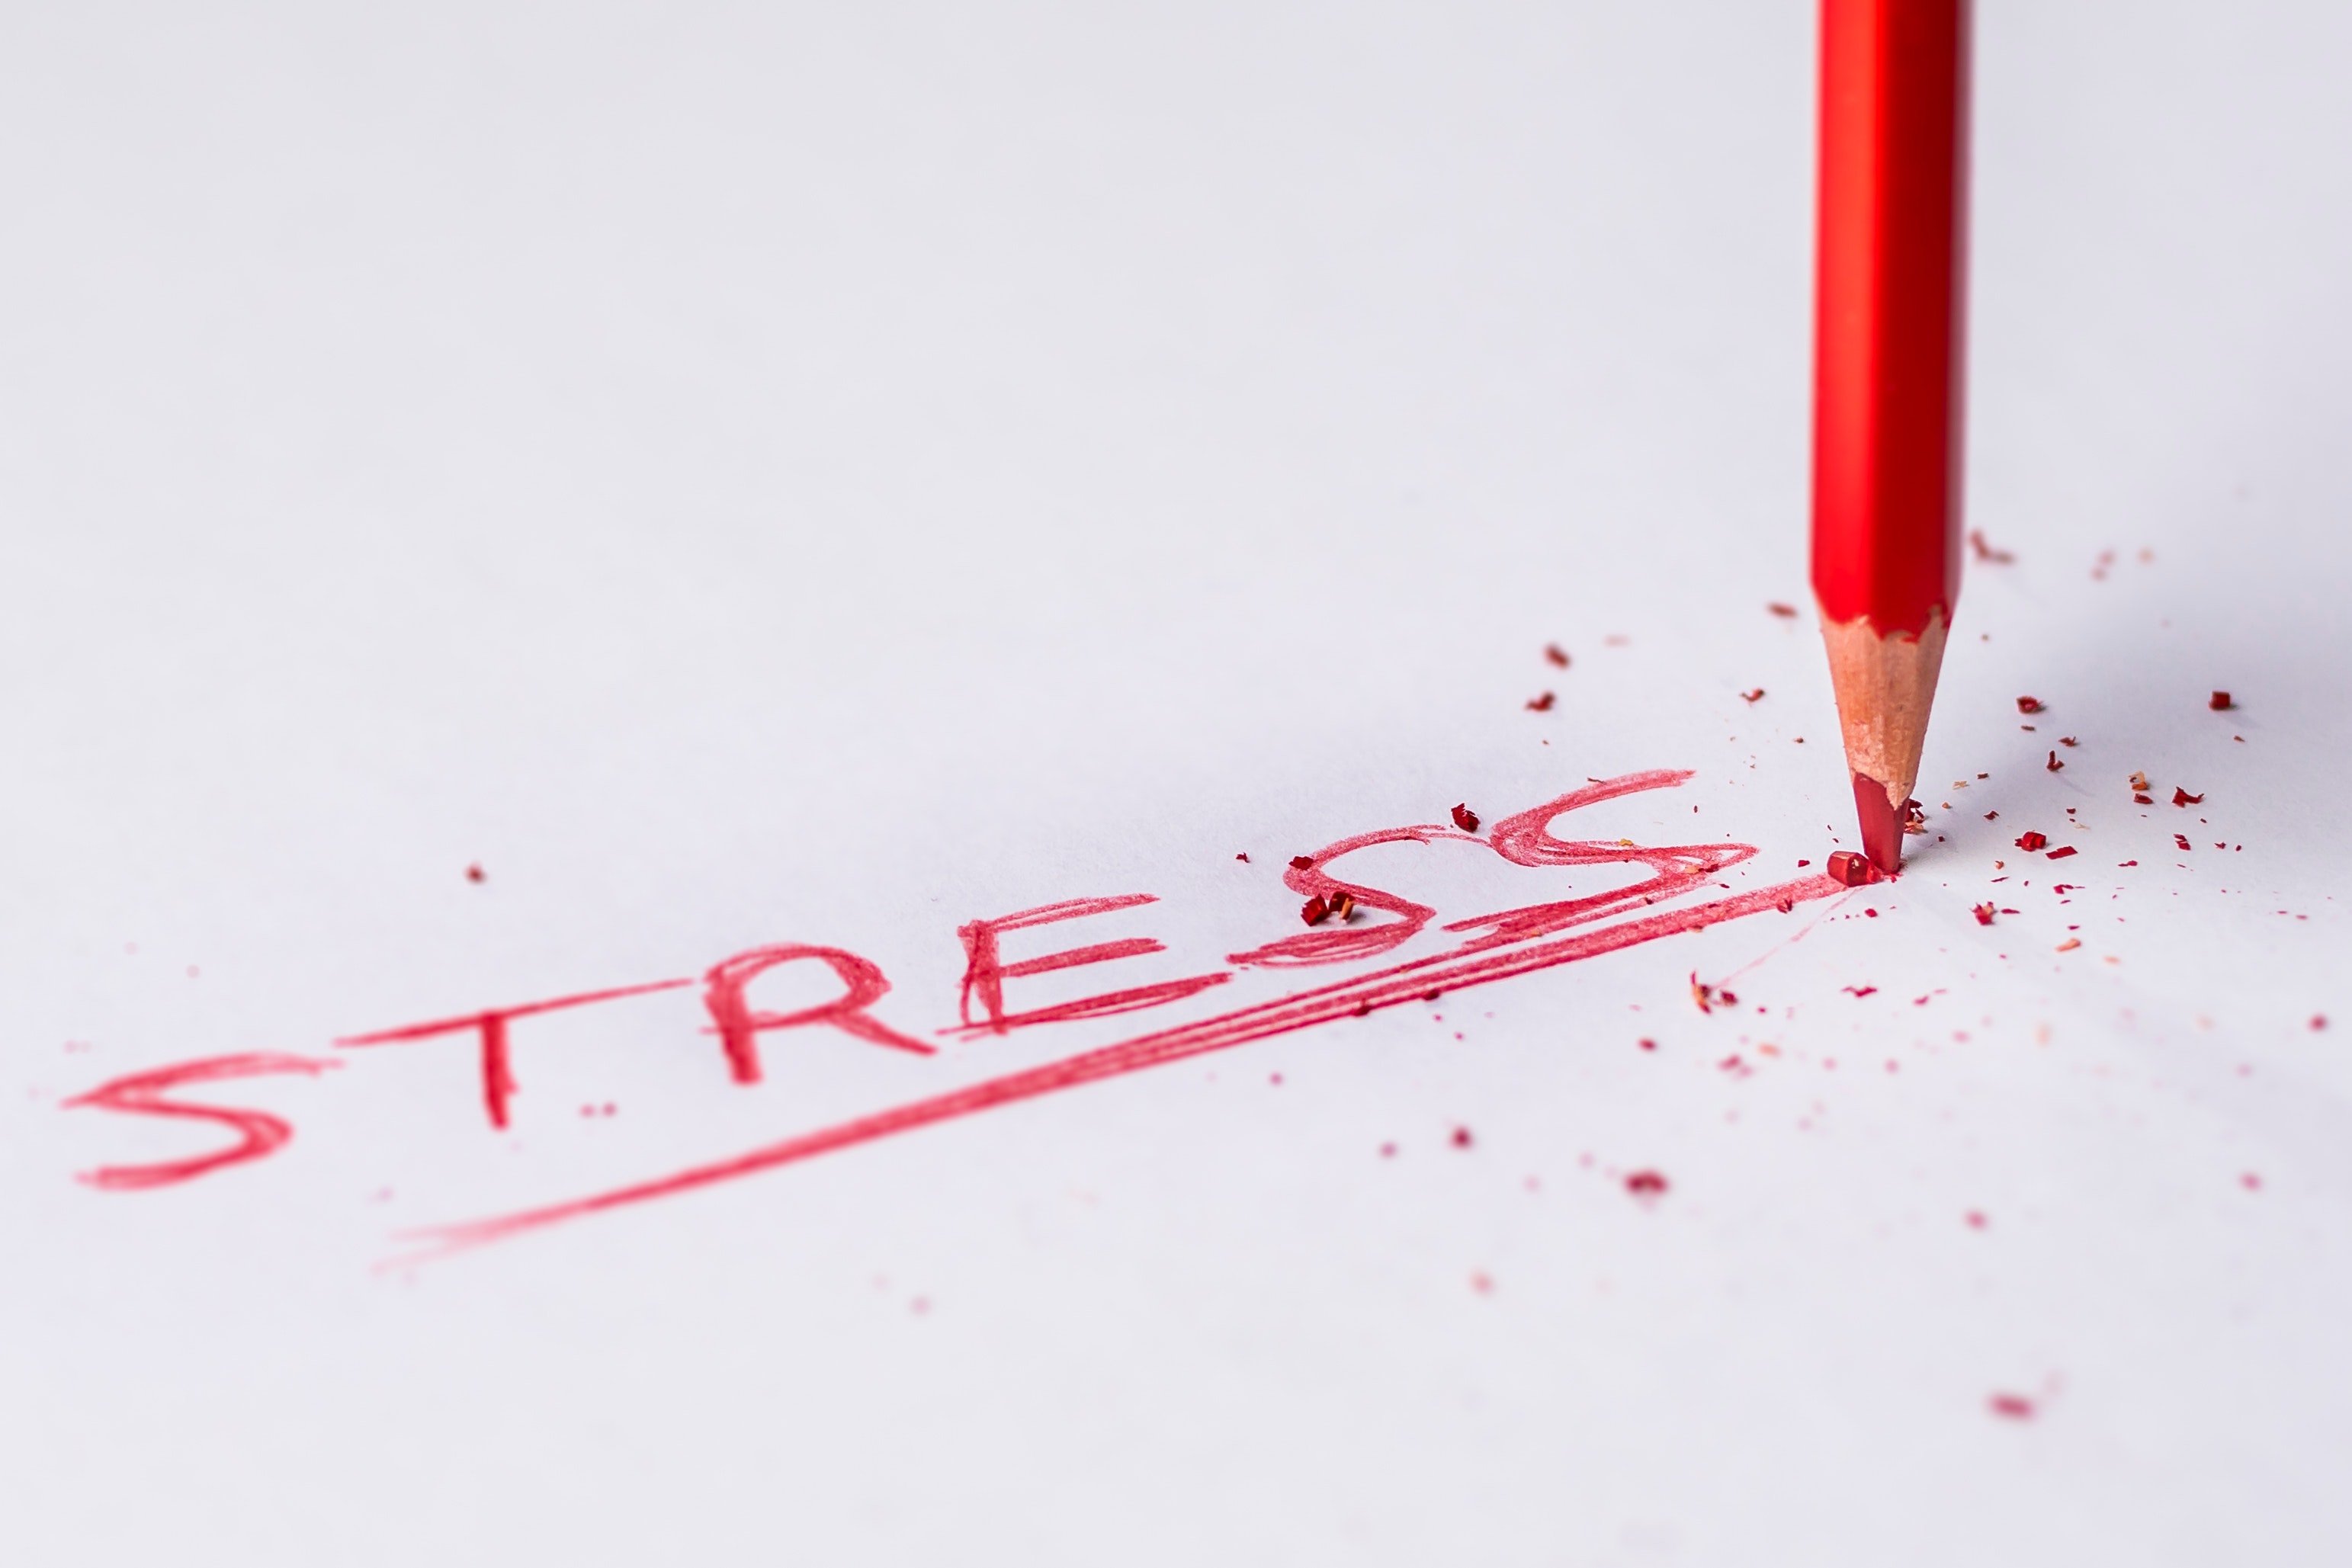 The word "Stress" in red with pencil breaking